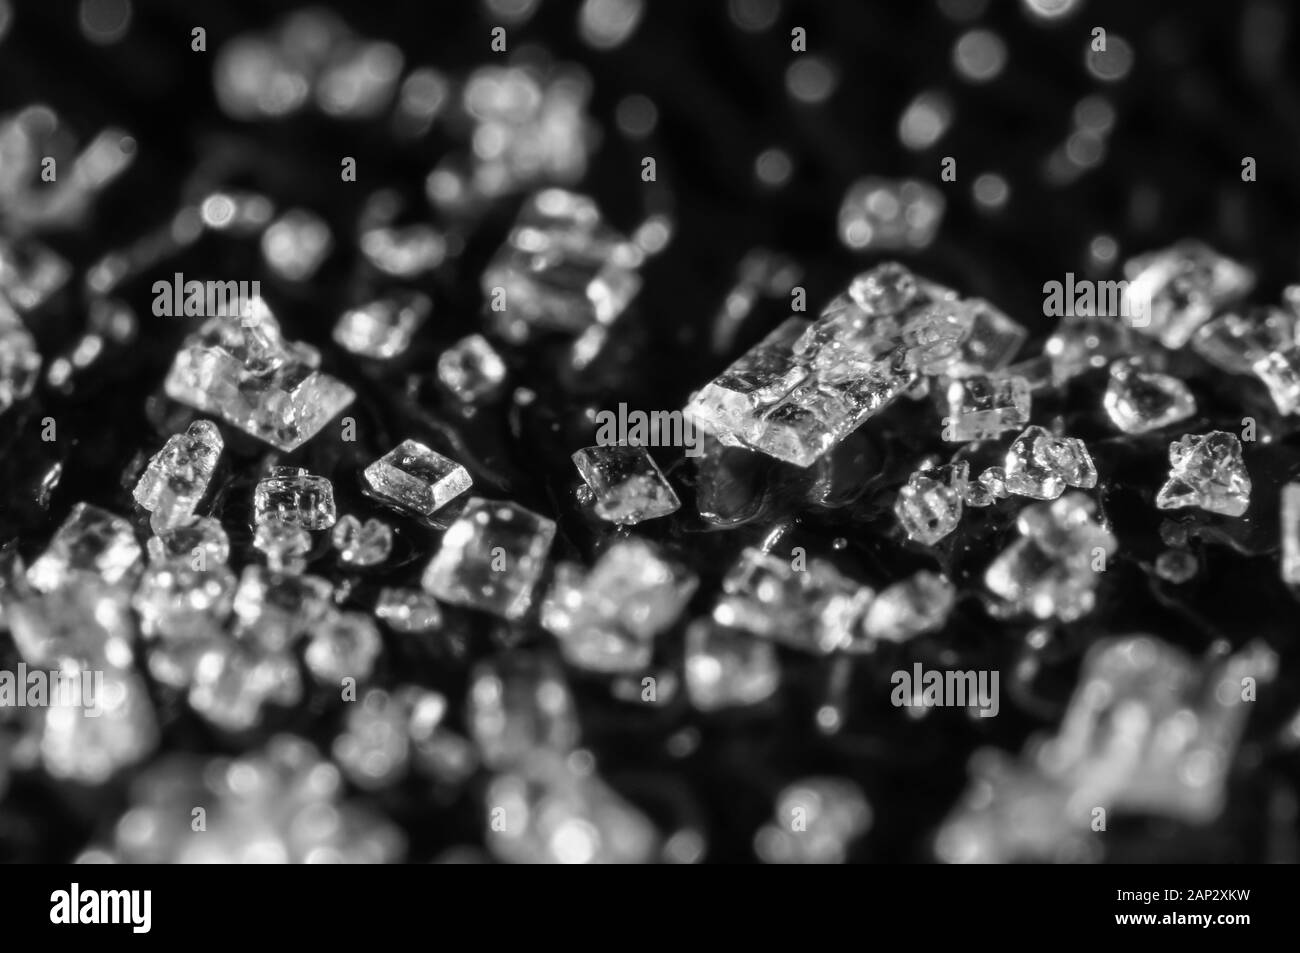 Sugar crystals on a black background. Super Macro. Soft Focus, shallow depth of field.black and white image. Stock Photo